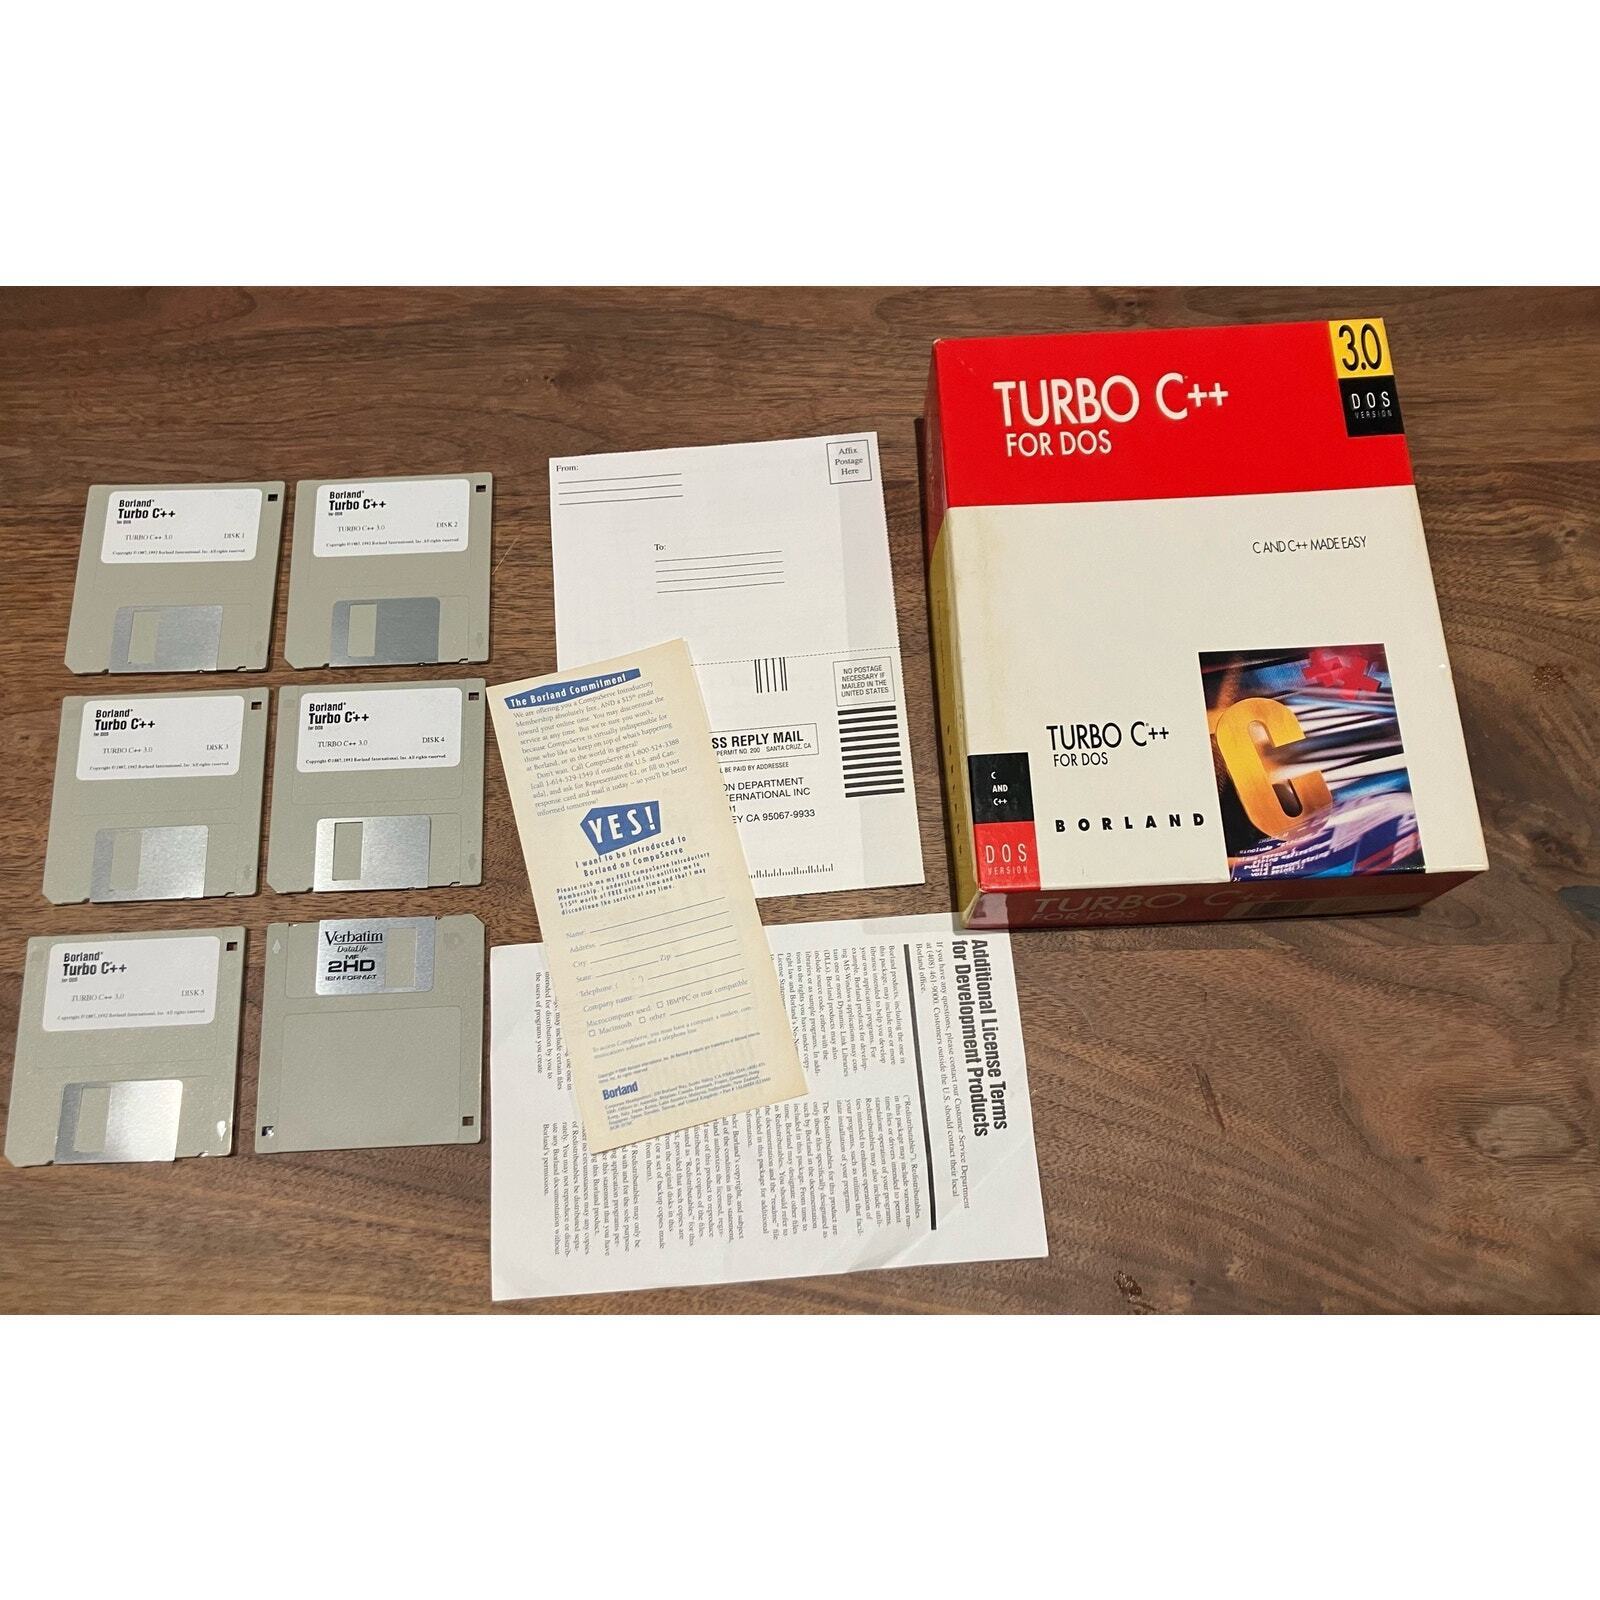  Borland Turbo C++ for DOS Windows 3.5’’ DD Disk Sets 1992, with Box, Vintage